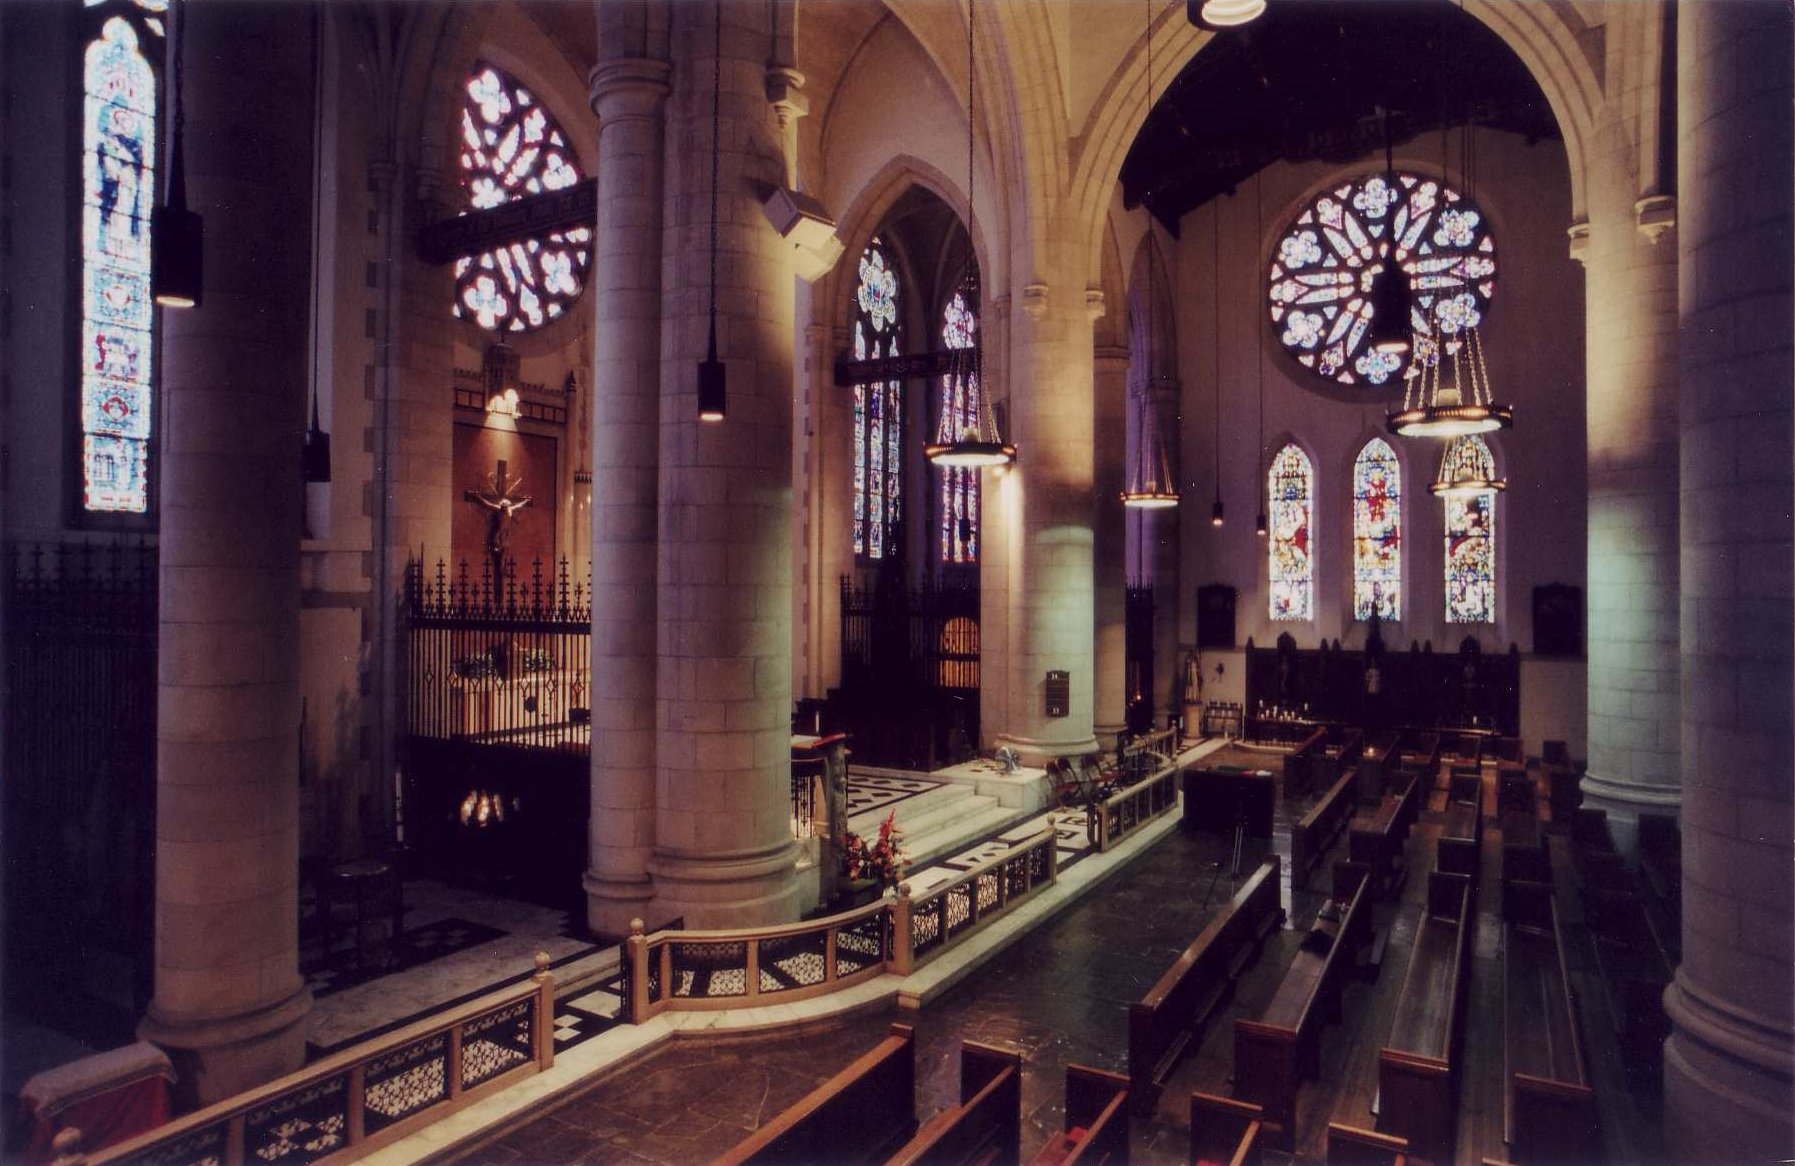 The Crossing, Church of the Sacred Heart, Greenville, Jersey City, New Jersey (Leon Yost c. 2005).JPG